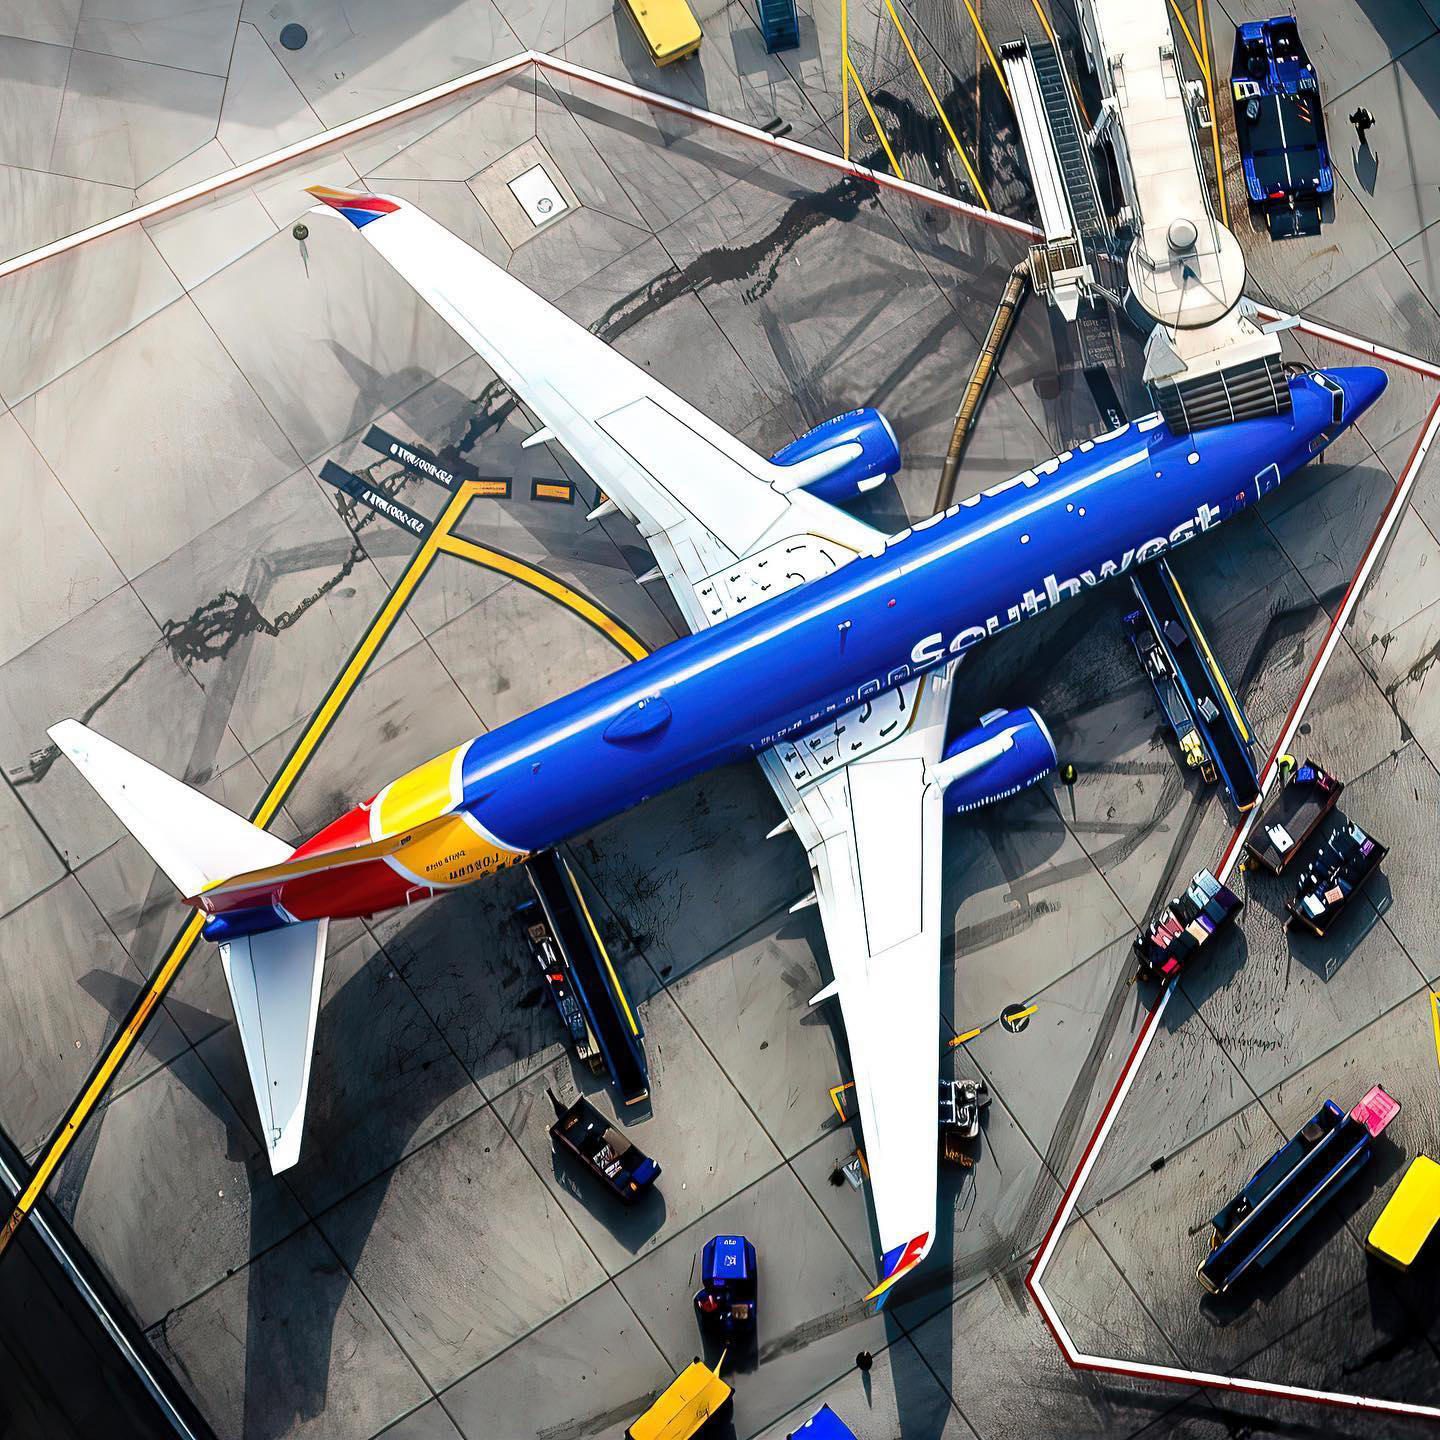 image  1 Southwest Airlines - Plot twist, an aircraft from above took a picture of an aircraft below